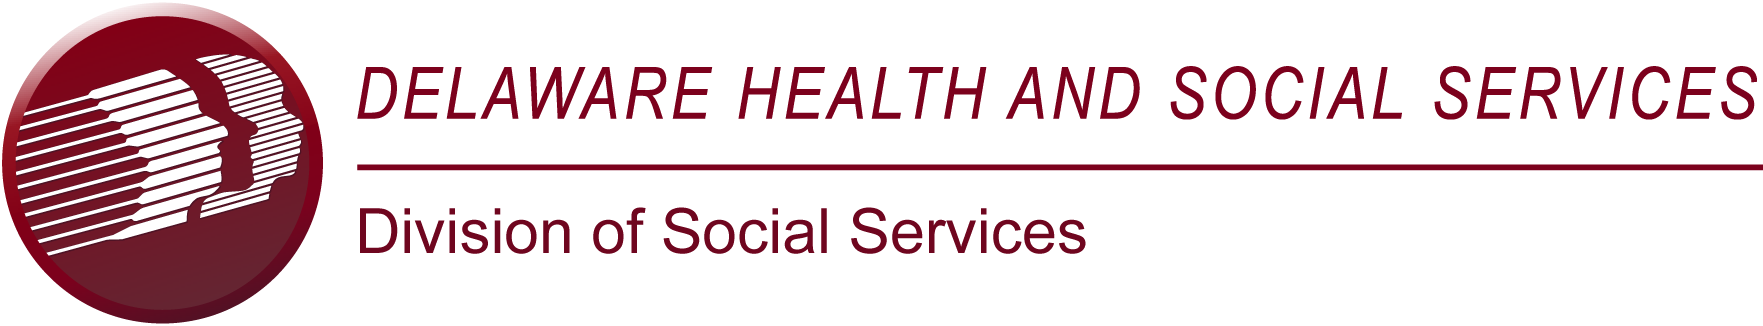 Logo for the Delaware Department of Health and Social Services, Division of Social Services